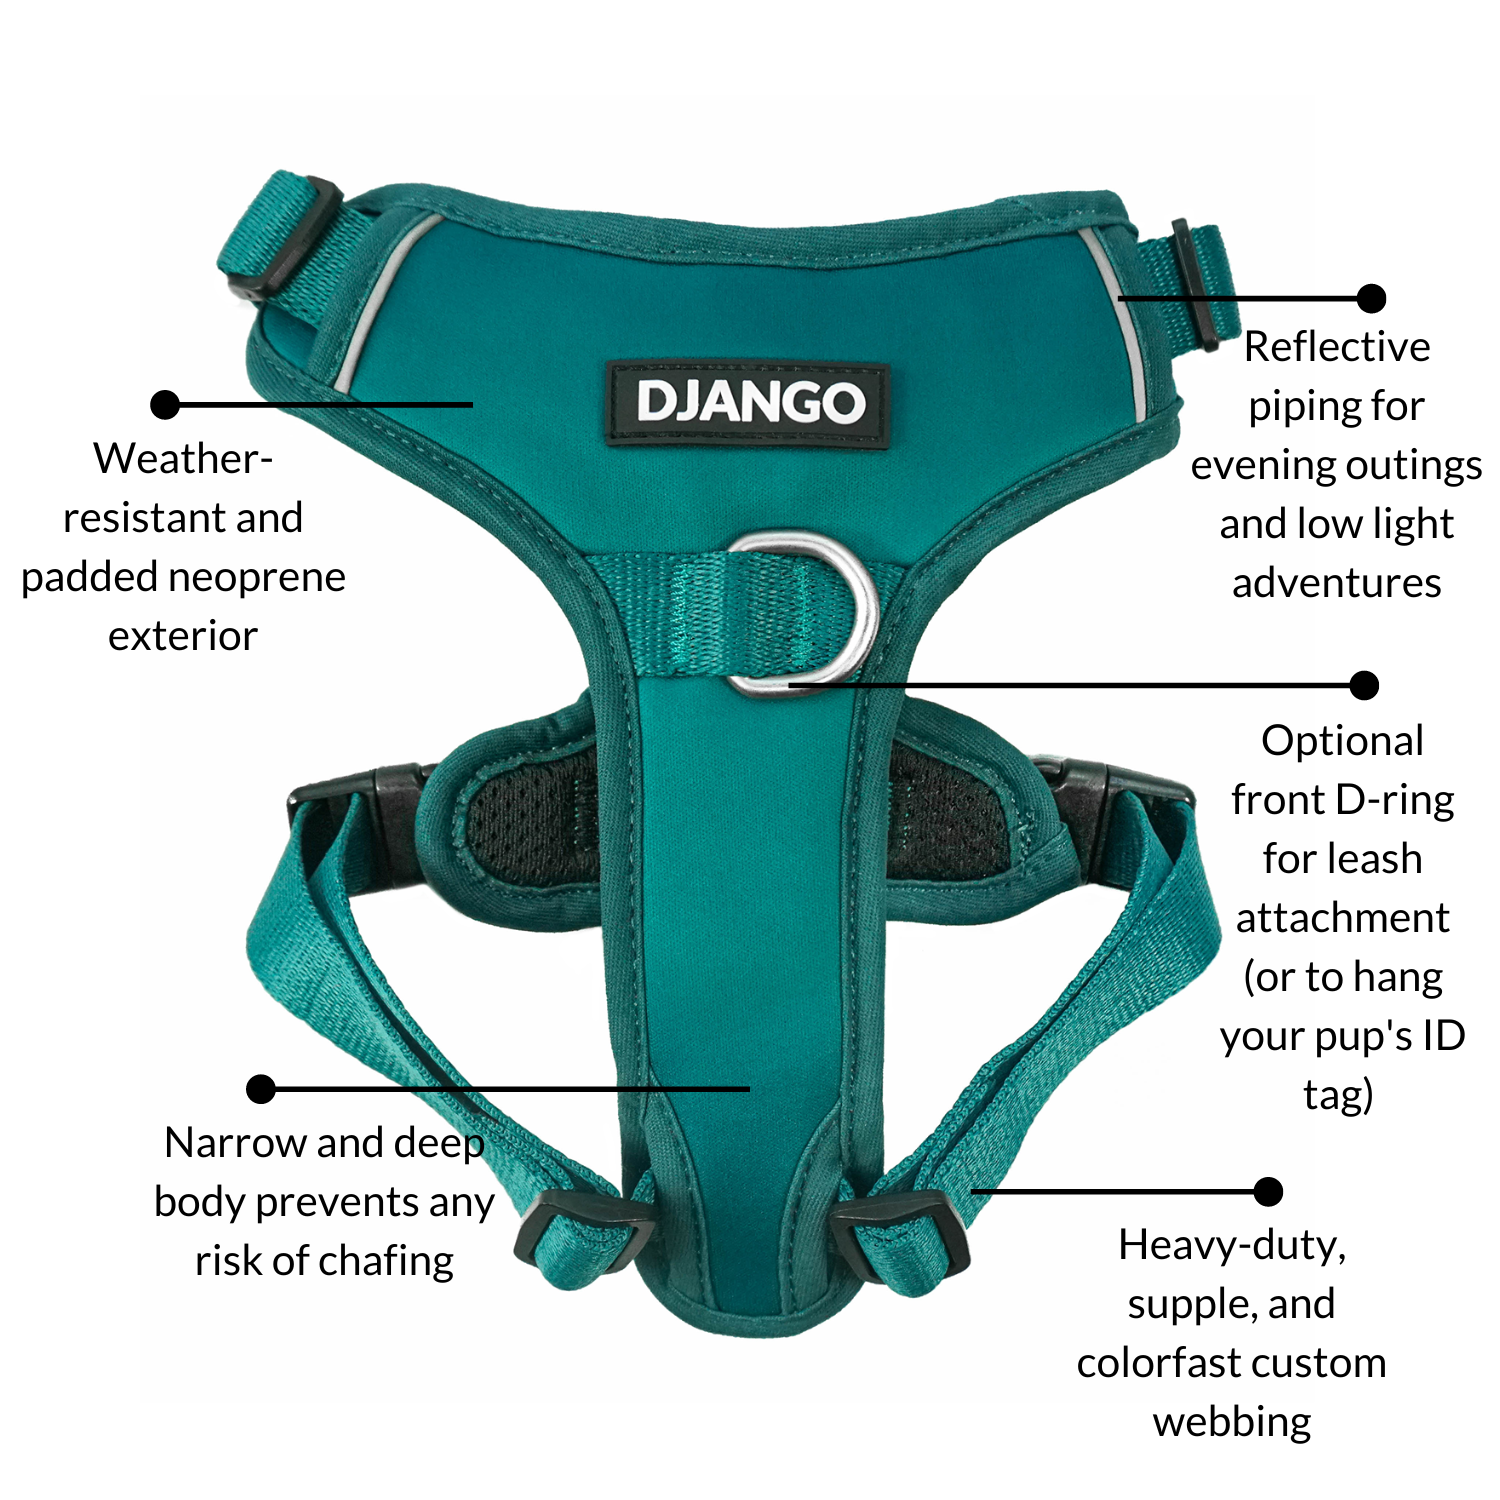 DJANGO Tahoe No Pull Dog Harness in Dark Teal Green - Key features include a weather-resistant and padded neoprene exterior, a narrow and deep harness body (to prevent the risk of chafing) reflective piping, and soft webbing. - djangobrand.com